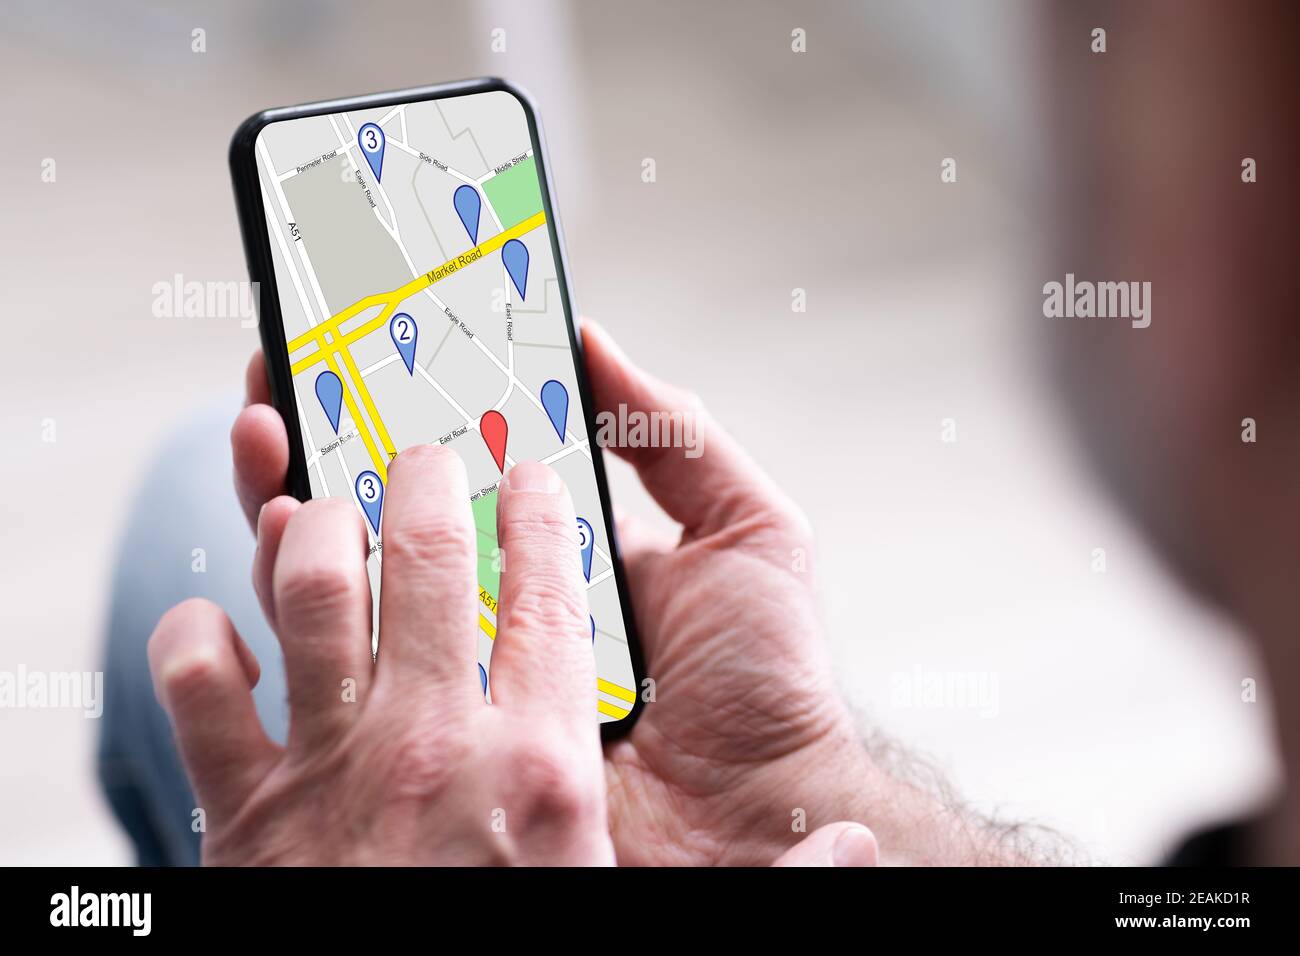 Person's Hand Using GPS Navigation Map Stock Photo